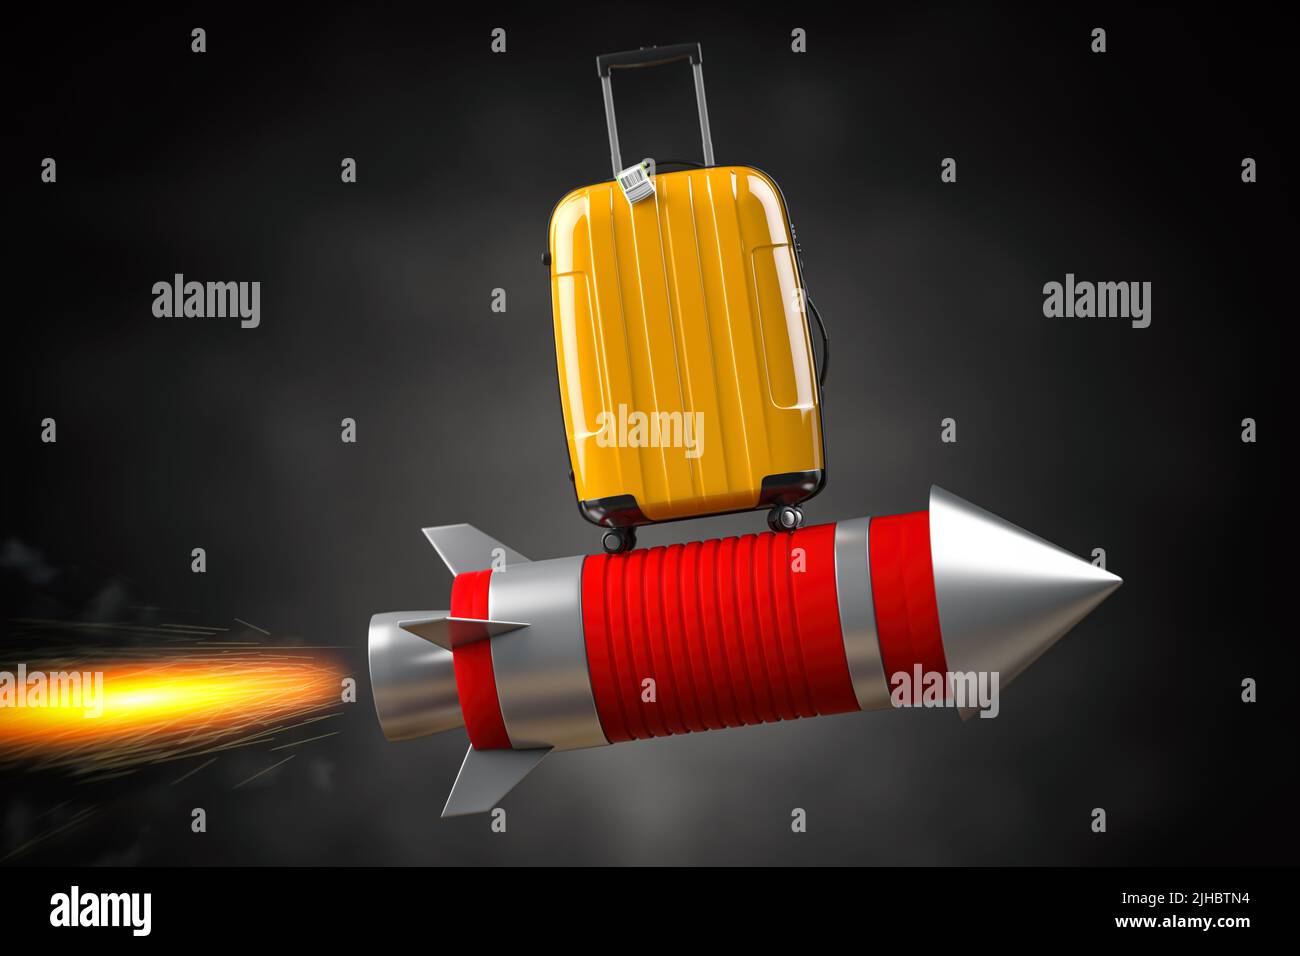 Fast delivery baggage and luggage concept, growth of tourism and travel. Suitcase on a flying rocket. 3d illustration Stock Photo